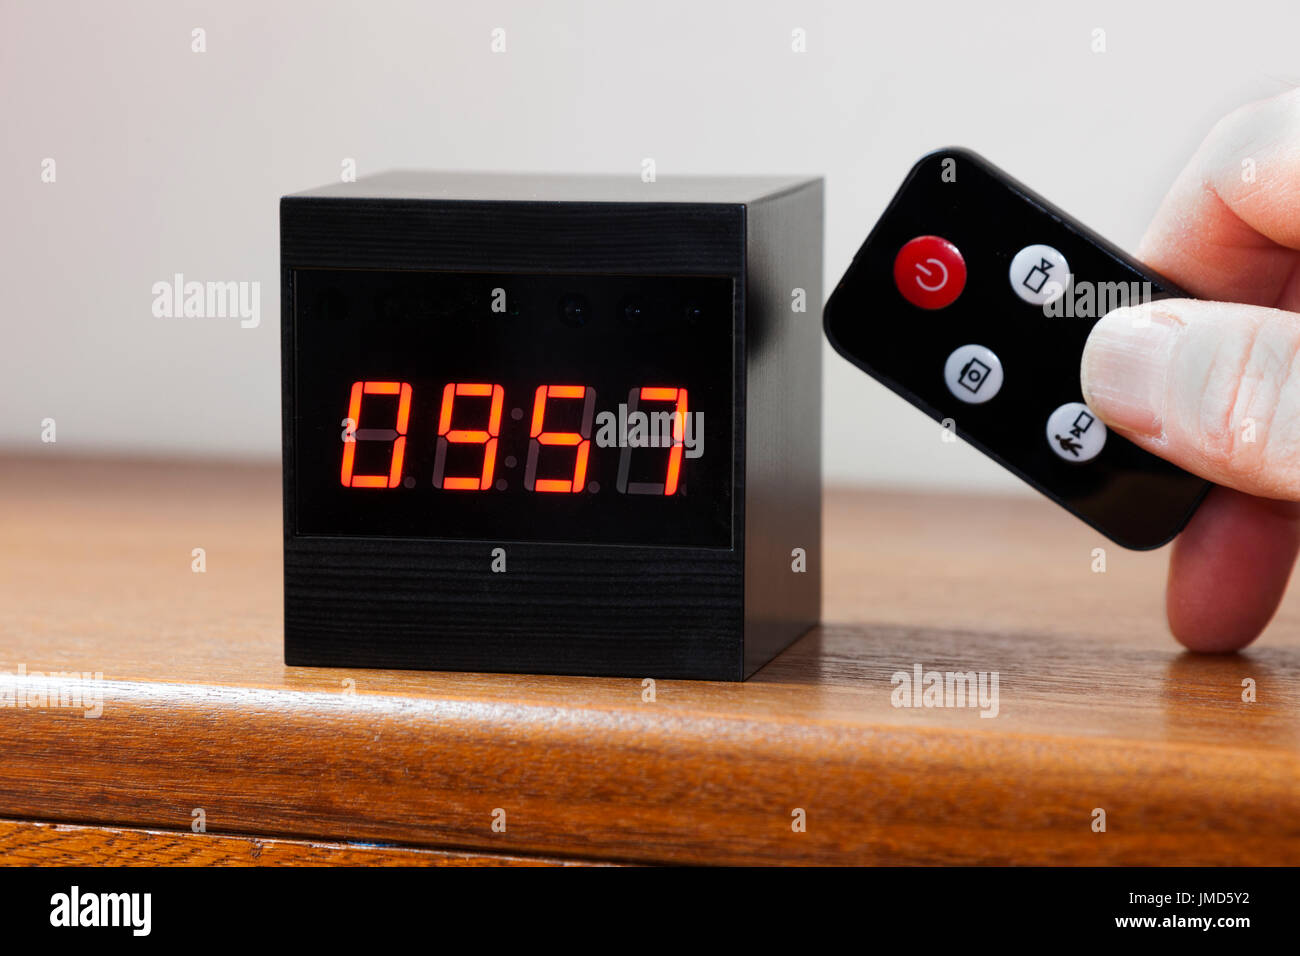 Secret spy camera hidden in a digital clock of the sort used to monitor old people and young children, babies, in the care of others. (88) Stock Photo